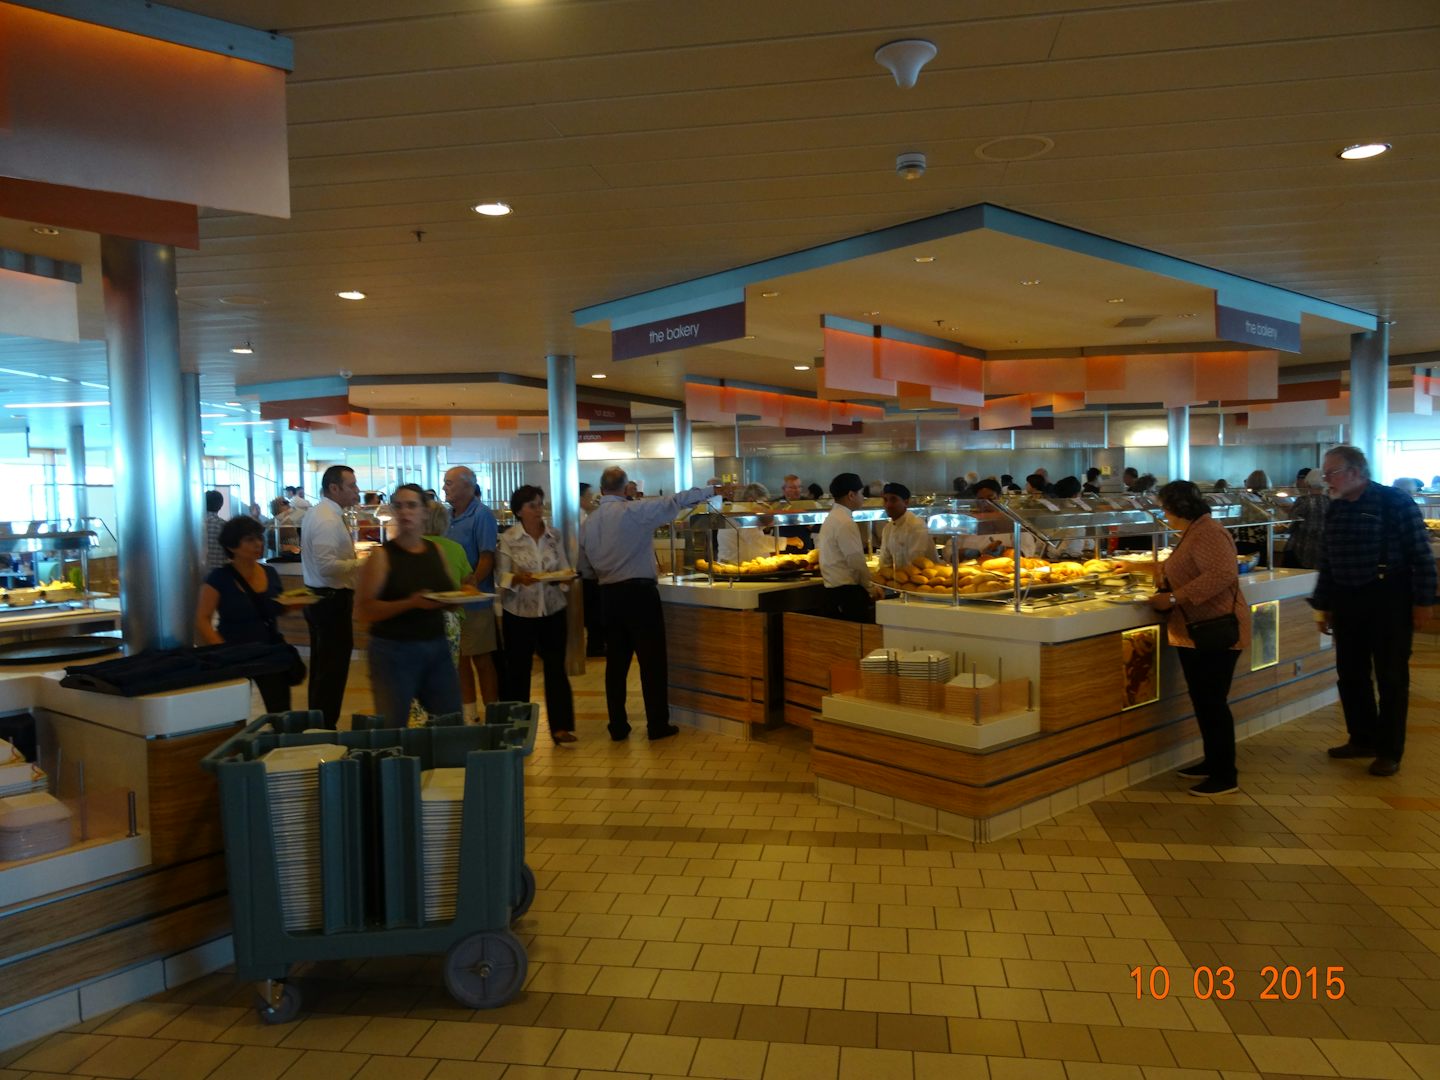 one of the many stations in the buffet